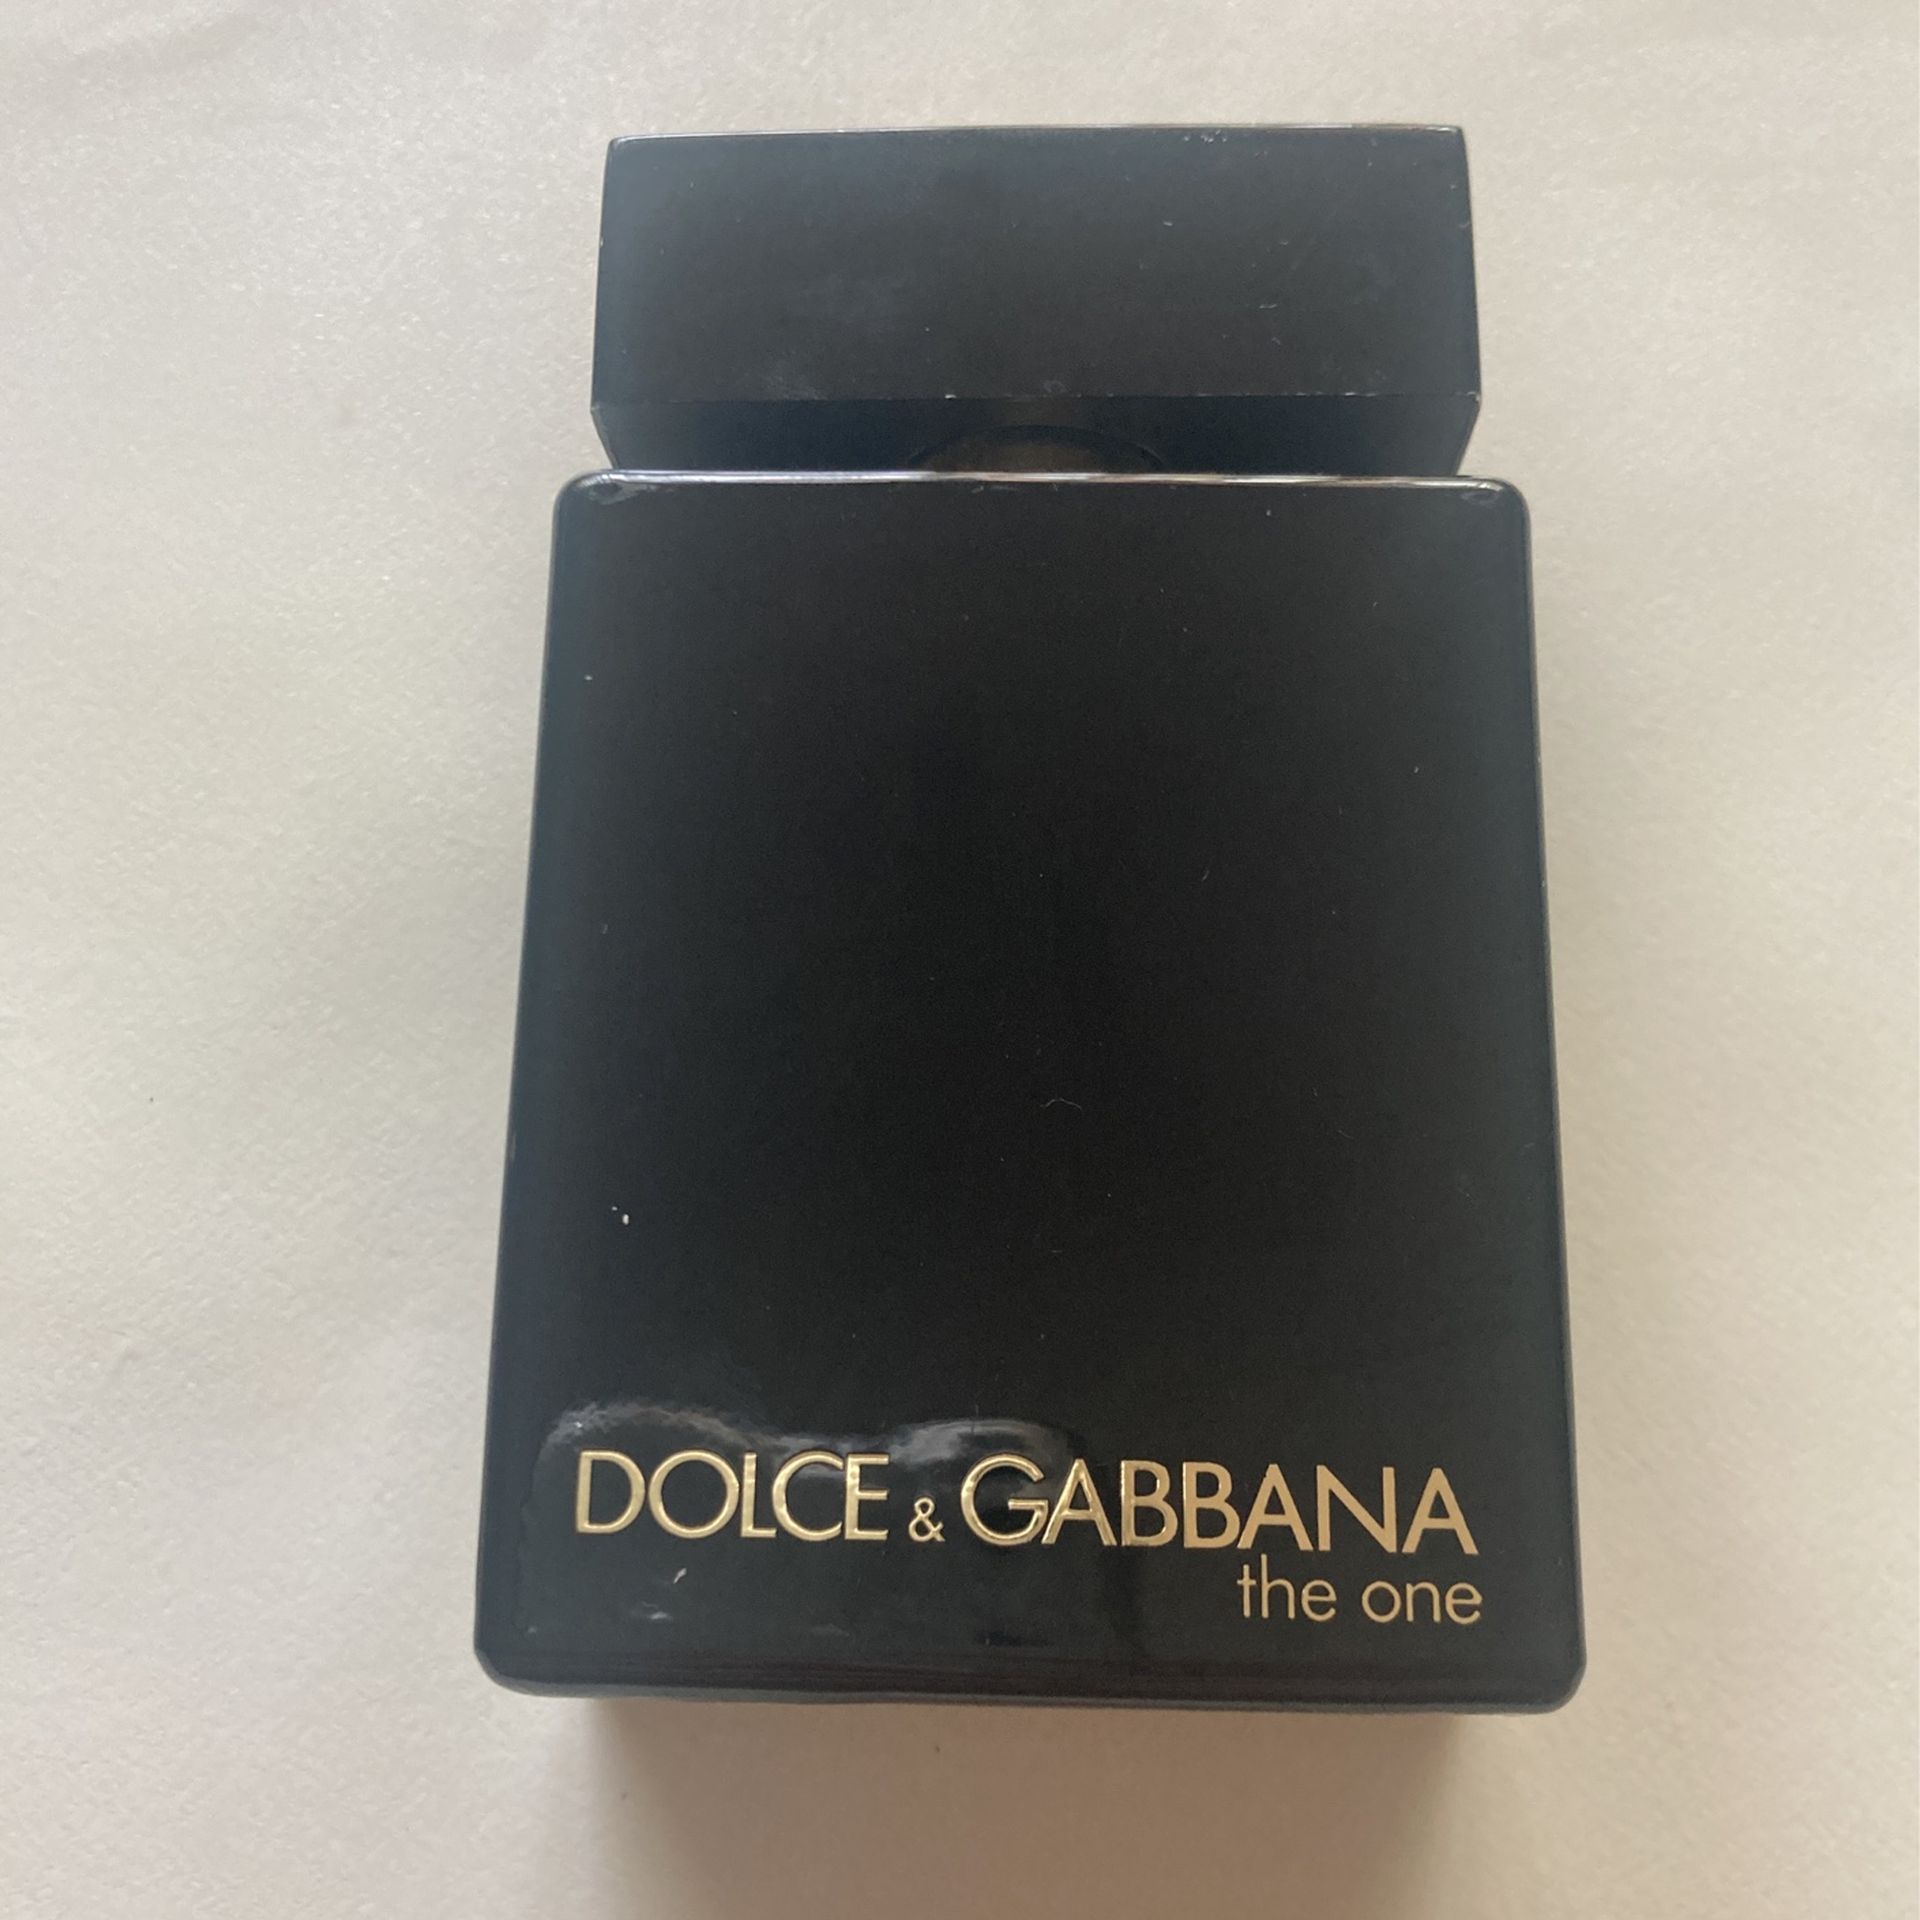 DOLCE & GABBANA THE ONE INTENSE GOLD 1.6 FL.OZ. IN GREAT SHAPE AND CONDITION